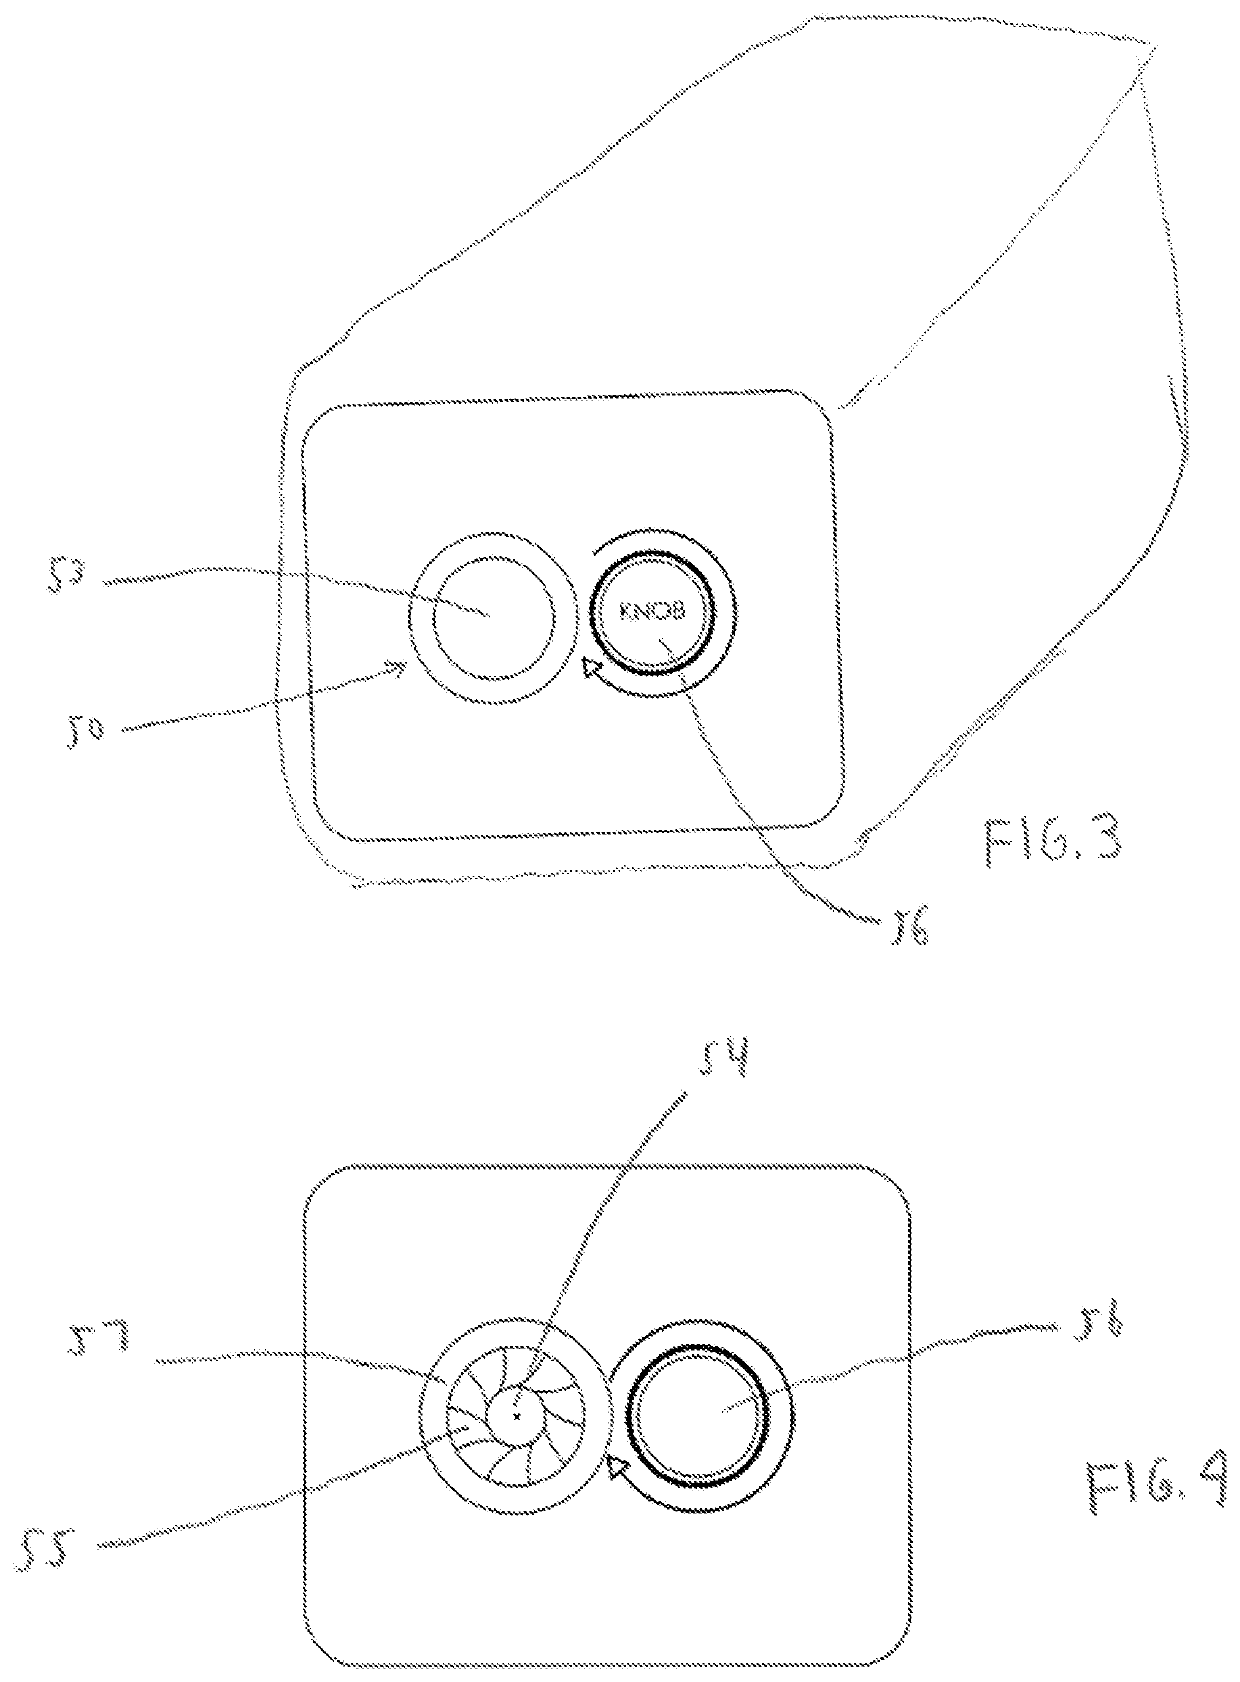 Method and apparatus for attachment and evacuation